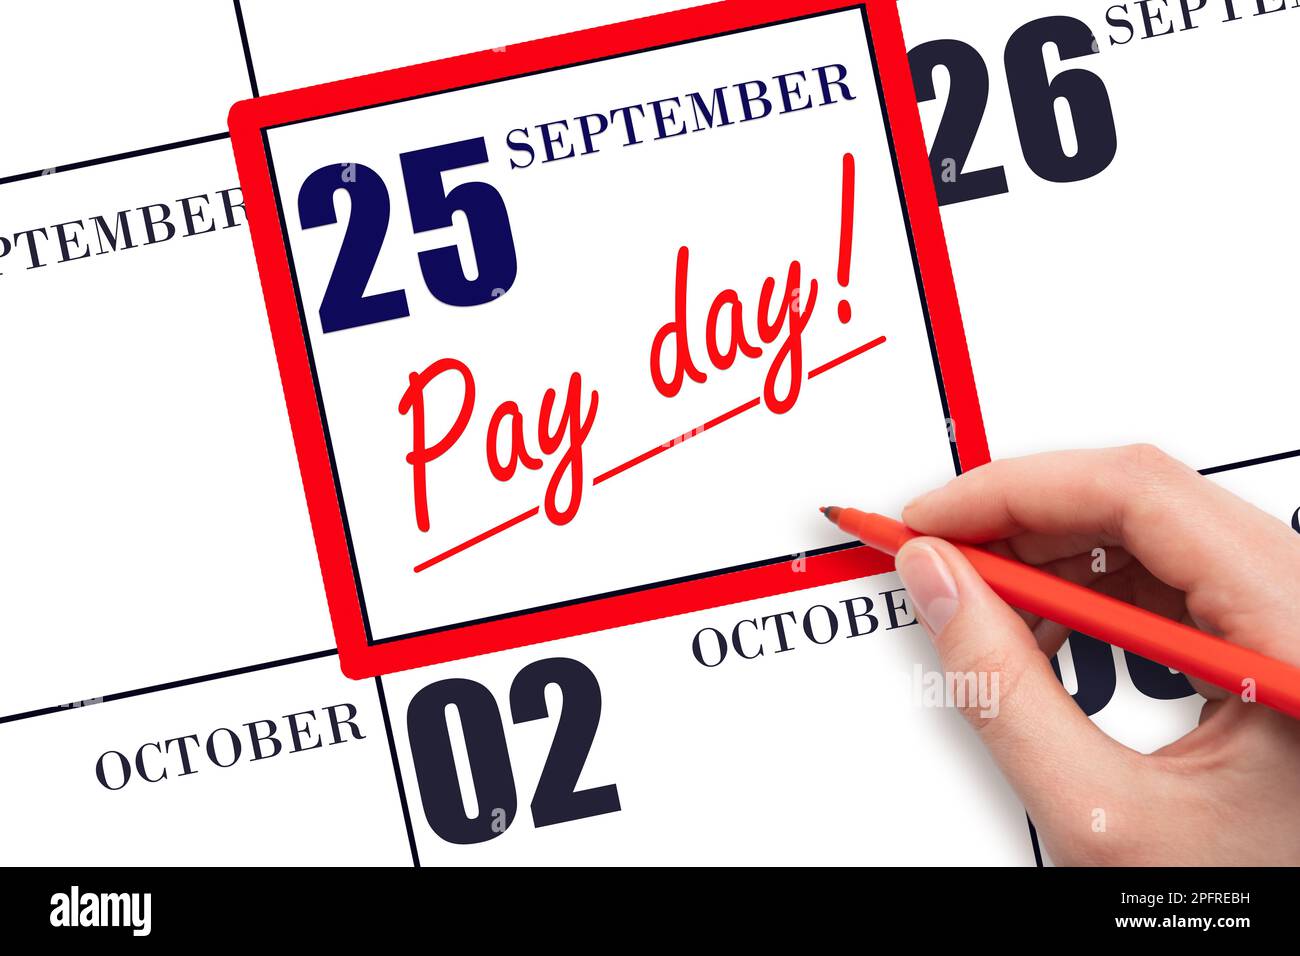 25th day of September. Hand writing text PAY DATE on calendar date September  25 and underline it. Payment due date.  Reminder concept of payment. Aut Stock Photo